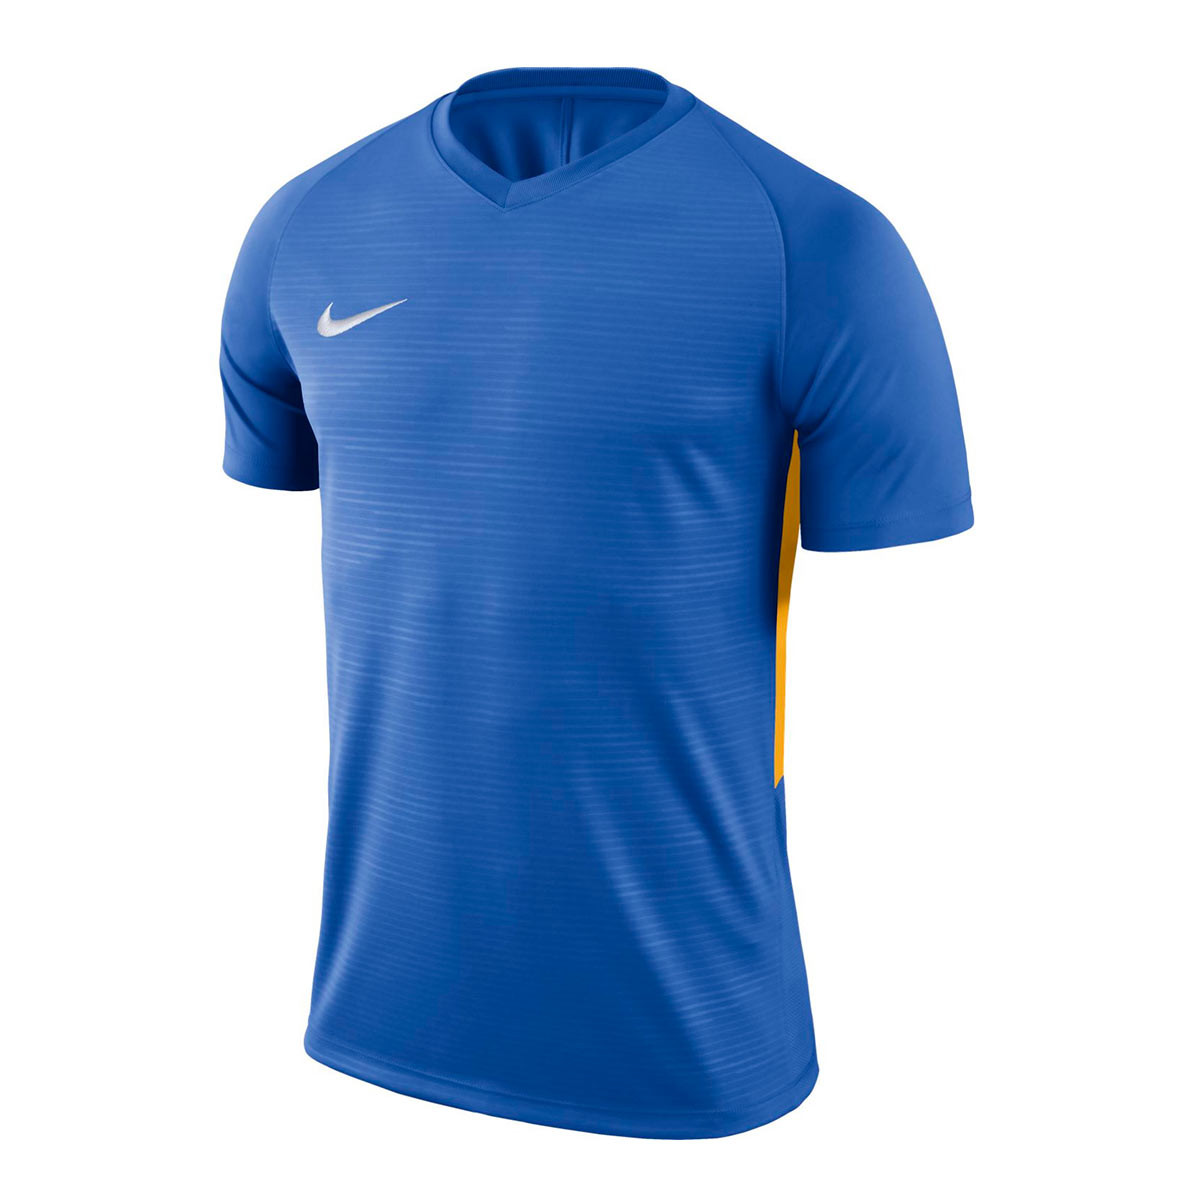 royal blue and gold jersey